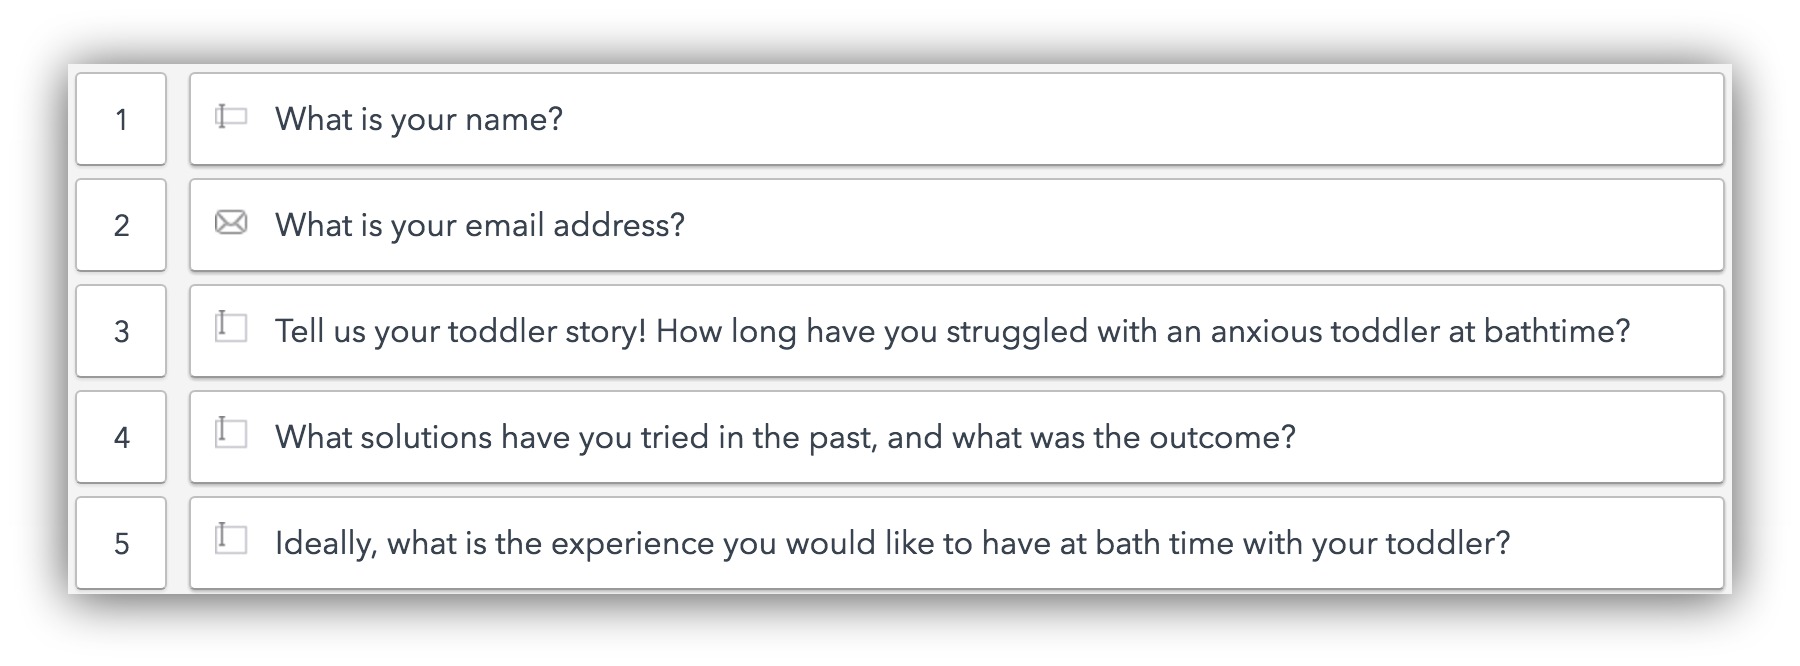 Screenshot showing questions about a consumer